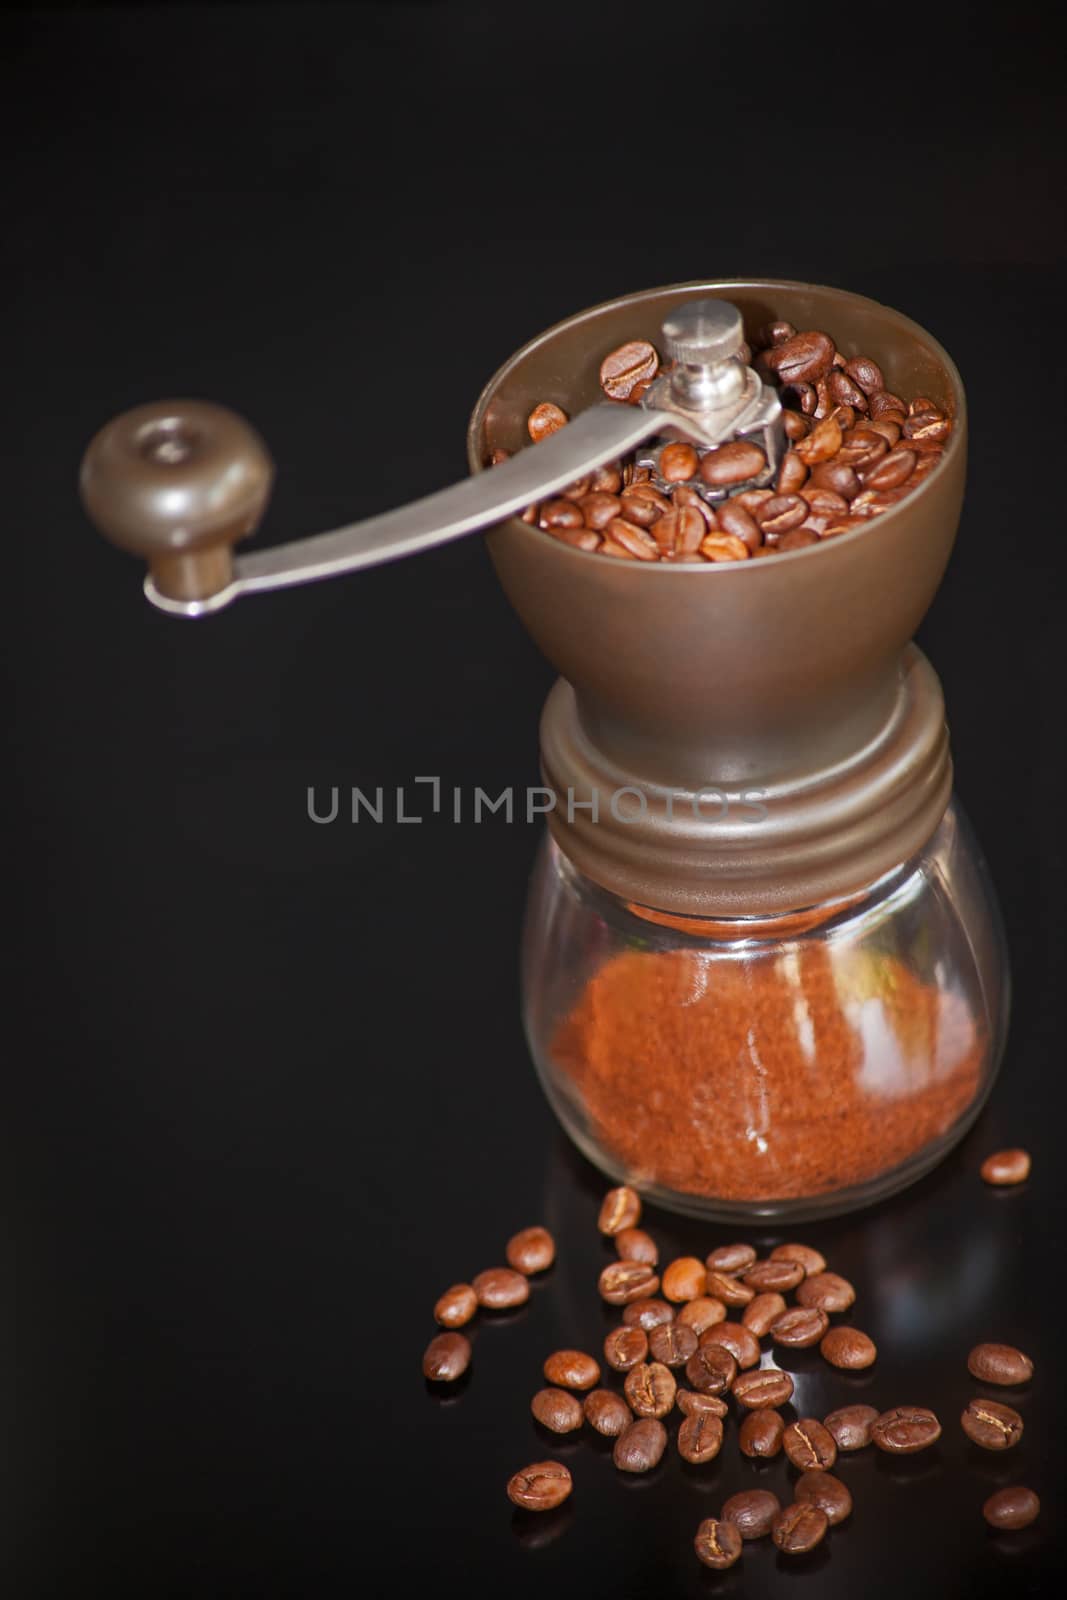 Coffee grinder with beans 13166 by kobus_peche